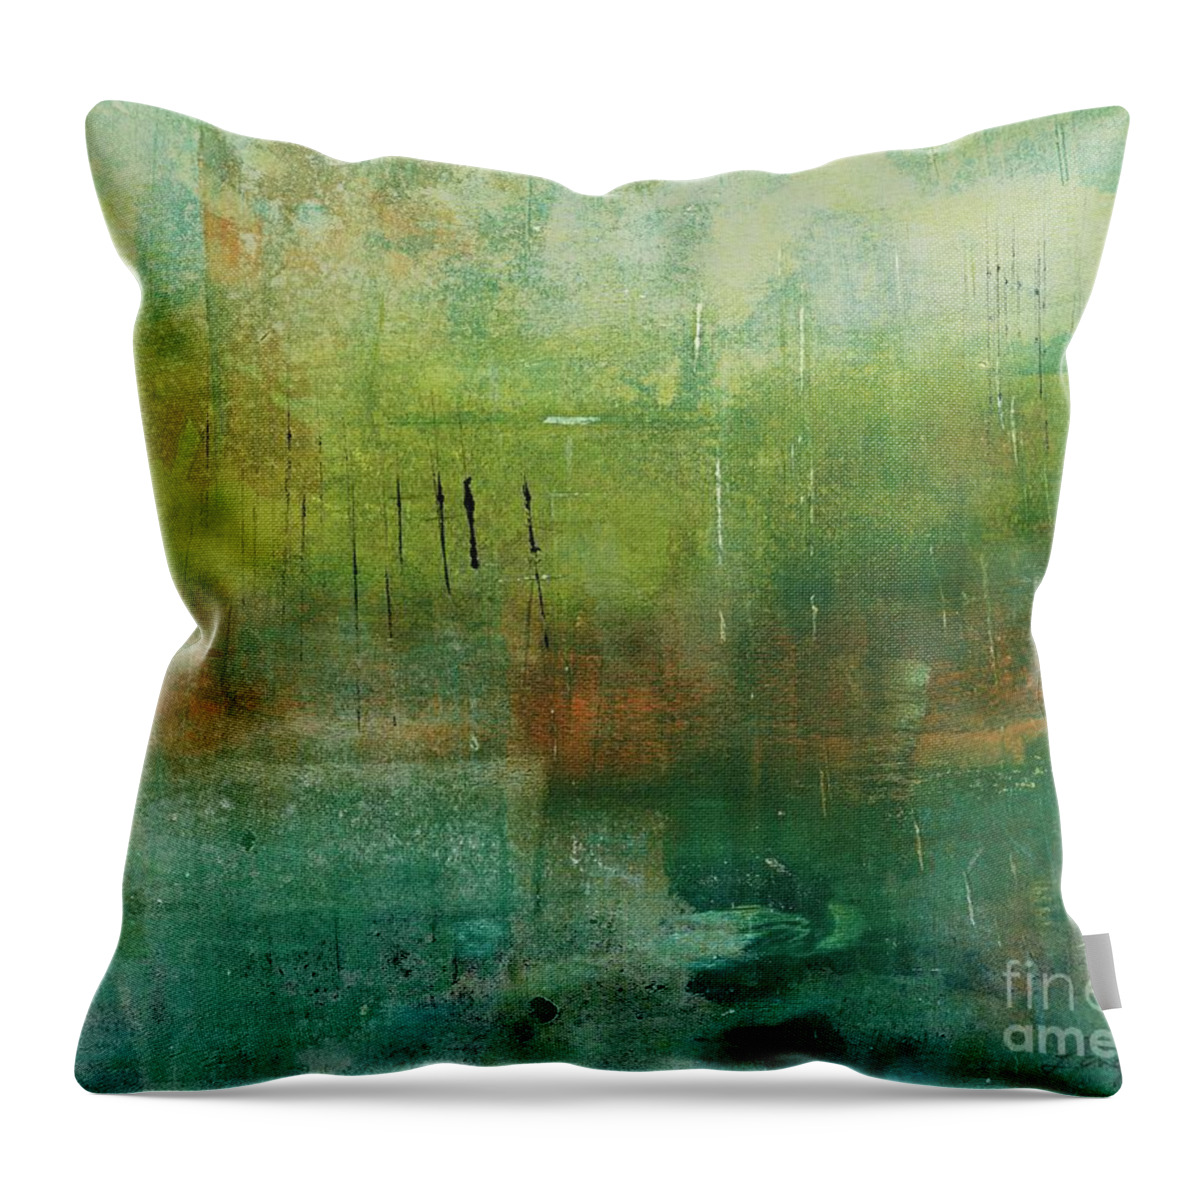 Abstract Throw Pillow featuring the painting Through The Mist by Laurel Englehardt